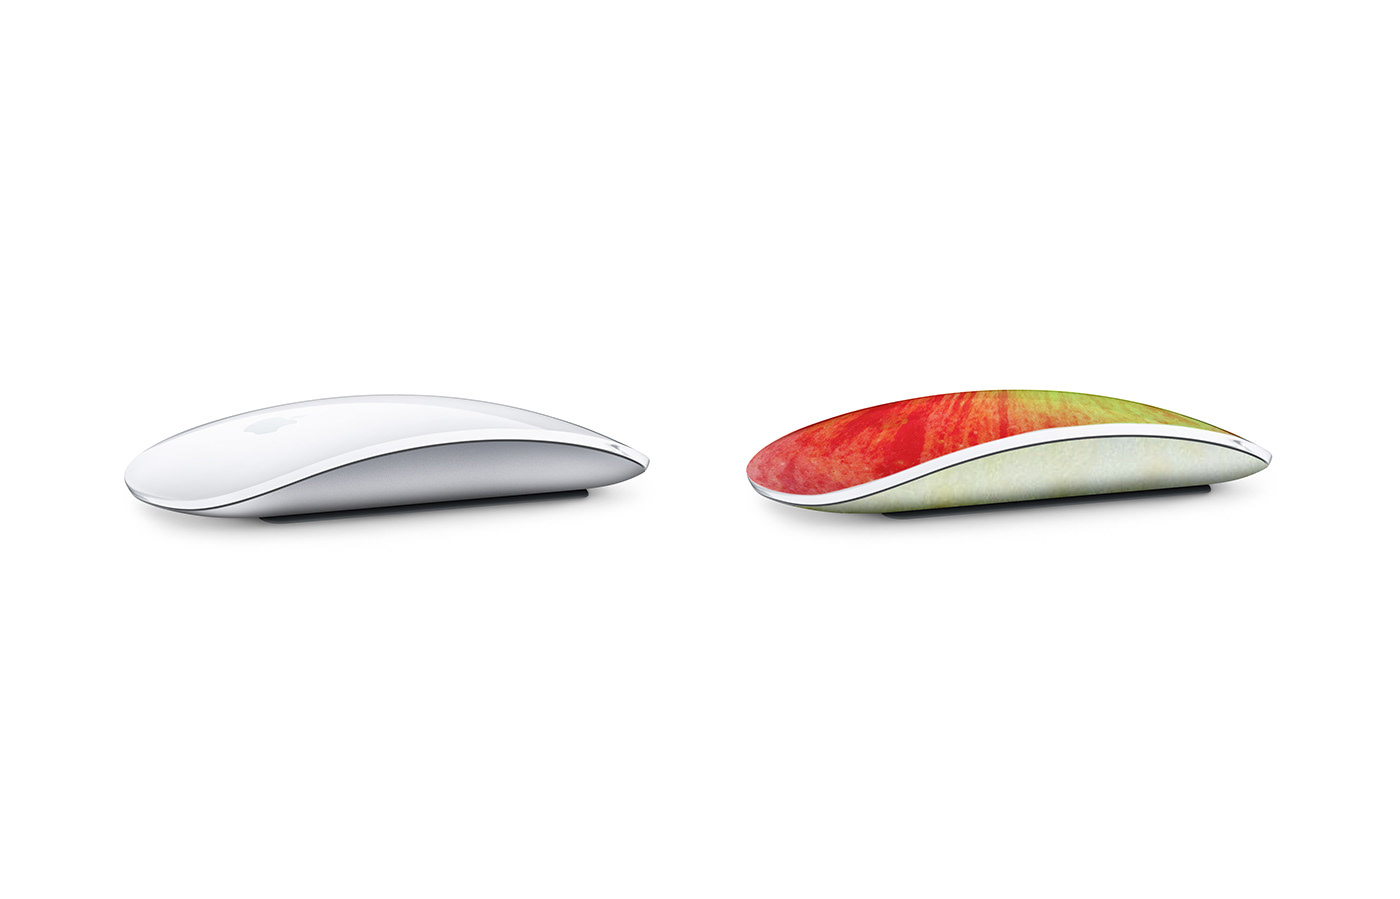 Apple colors apple design apple products apples applied colors colorways appled